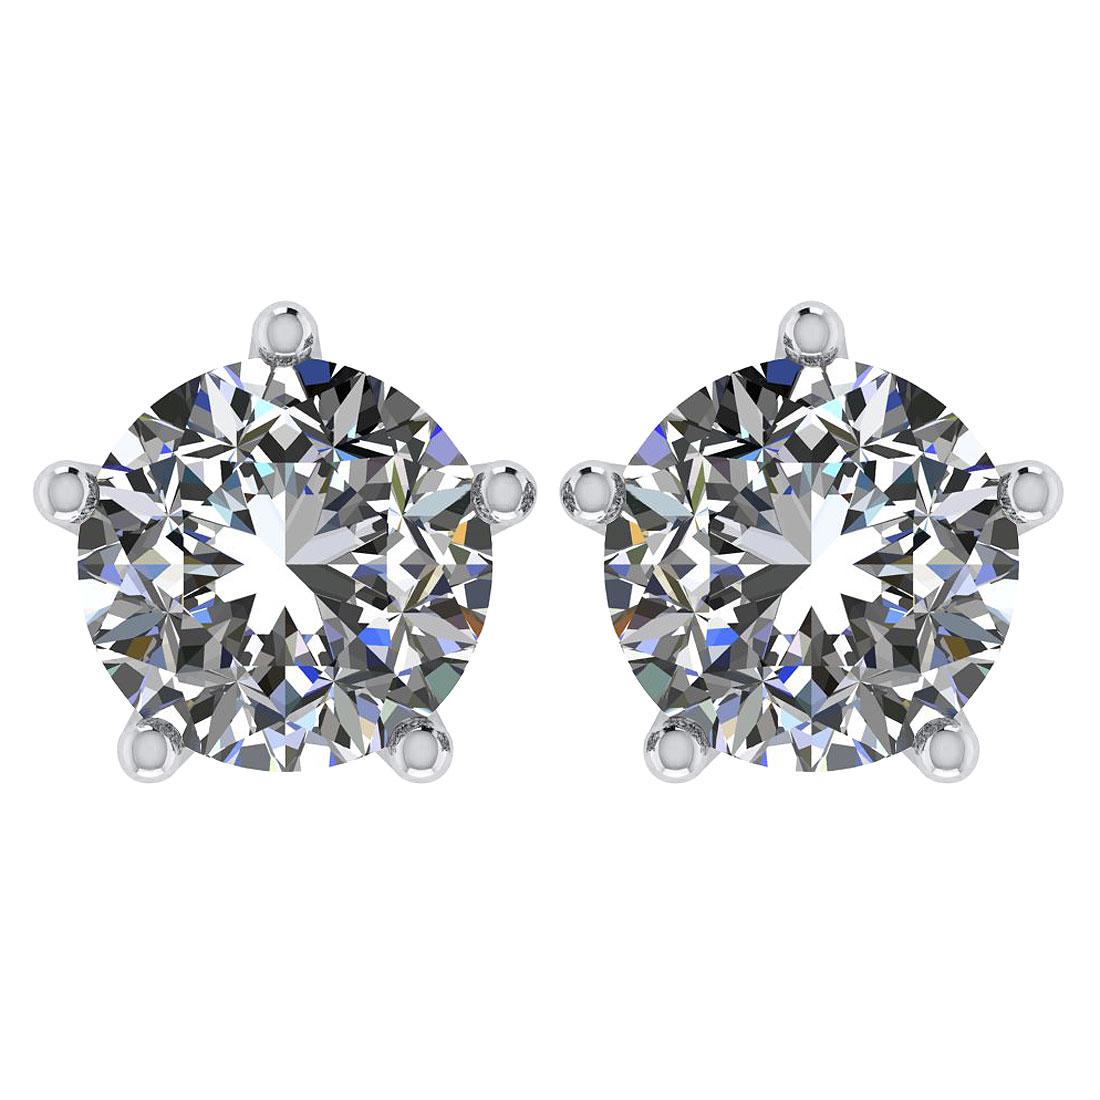 CERTIFIED 1.53 CTW ROUND E/VS2 DIAMOND (LAB GROWN Certified DIAMOND SOLITAIRE EARRINGS ) IN 14K YELL